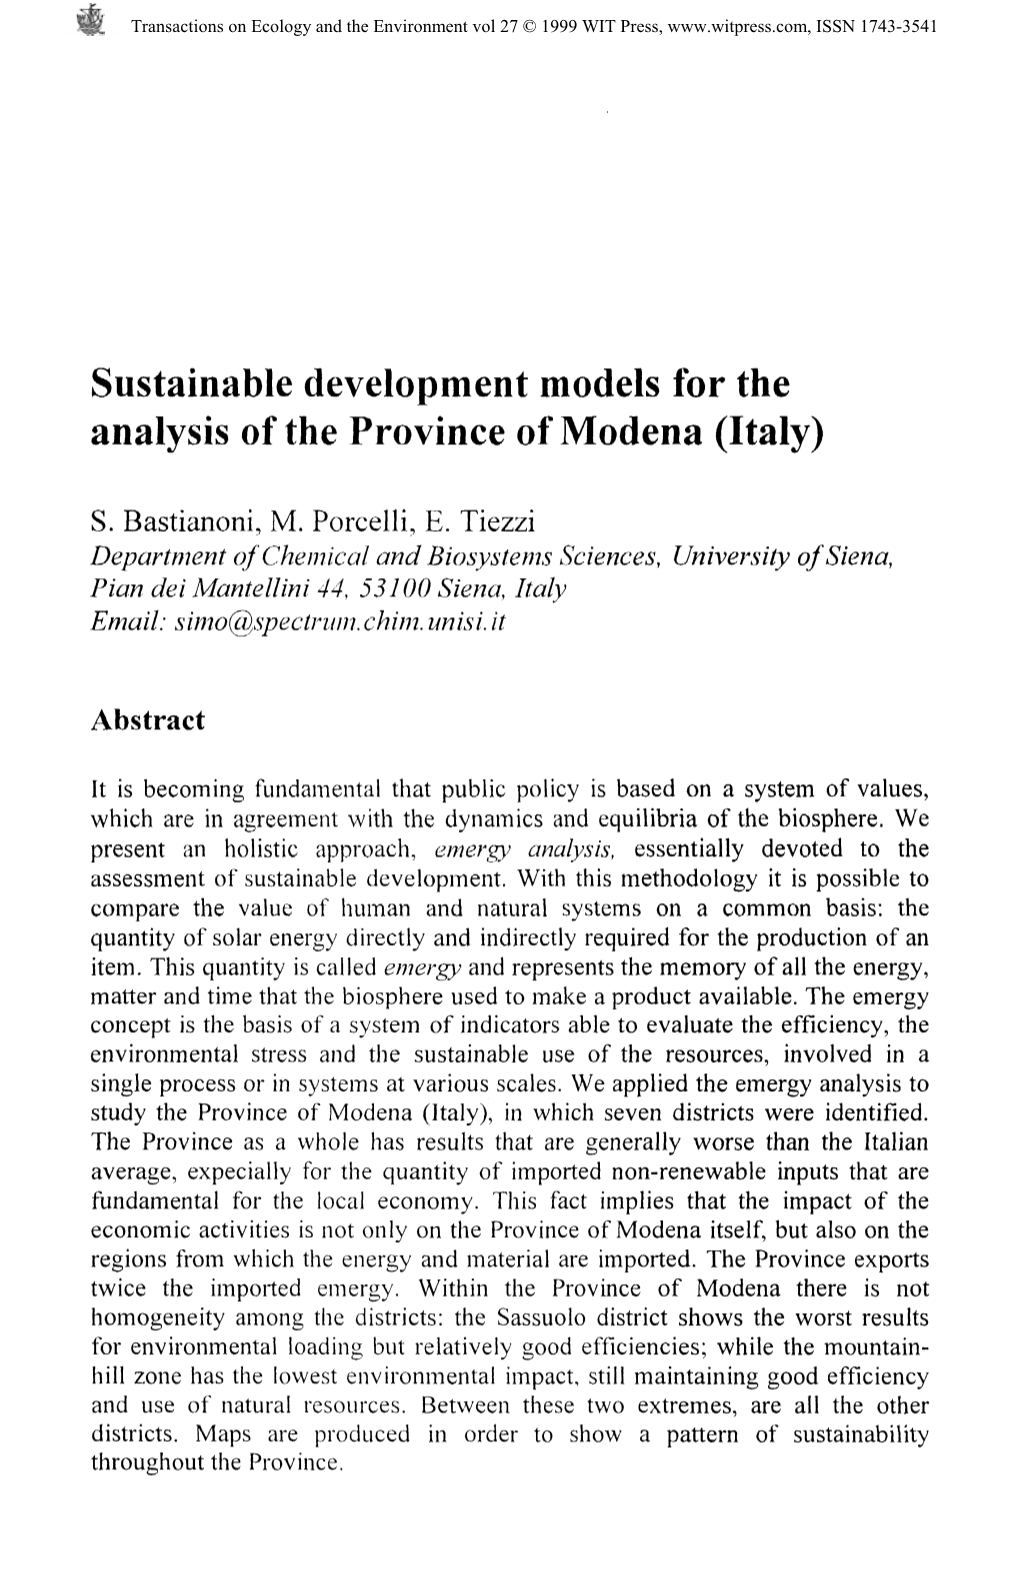 Sustainable Development Models for the Analysis of the Province of Modena (Italy)